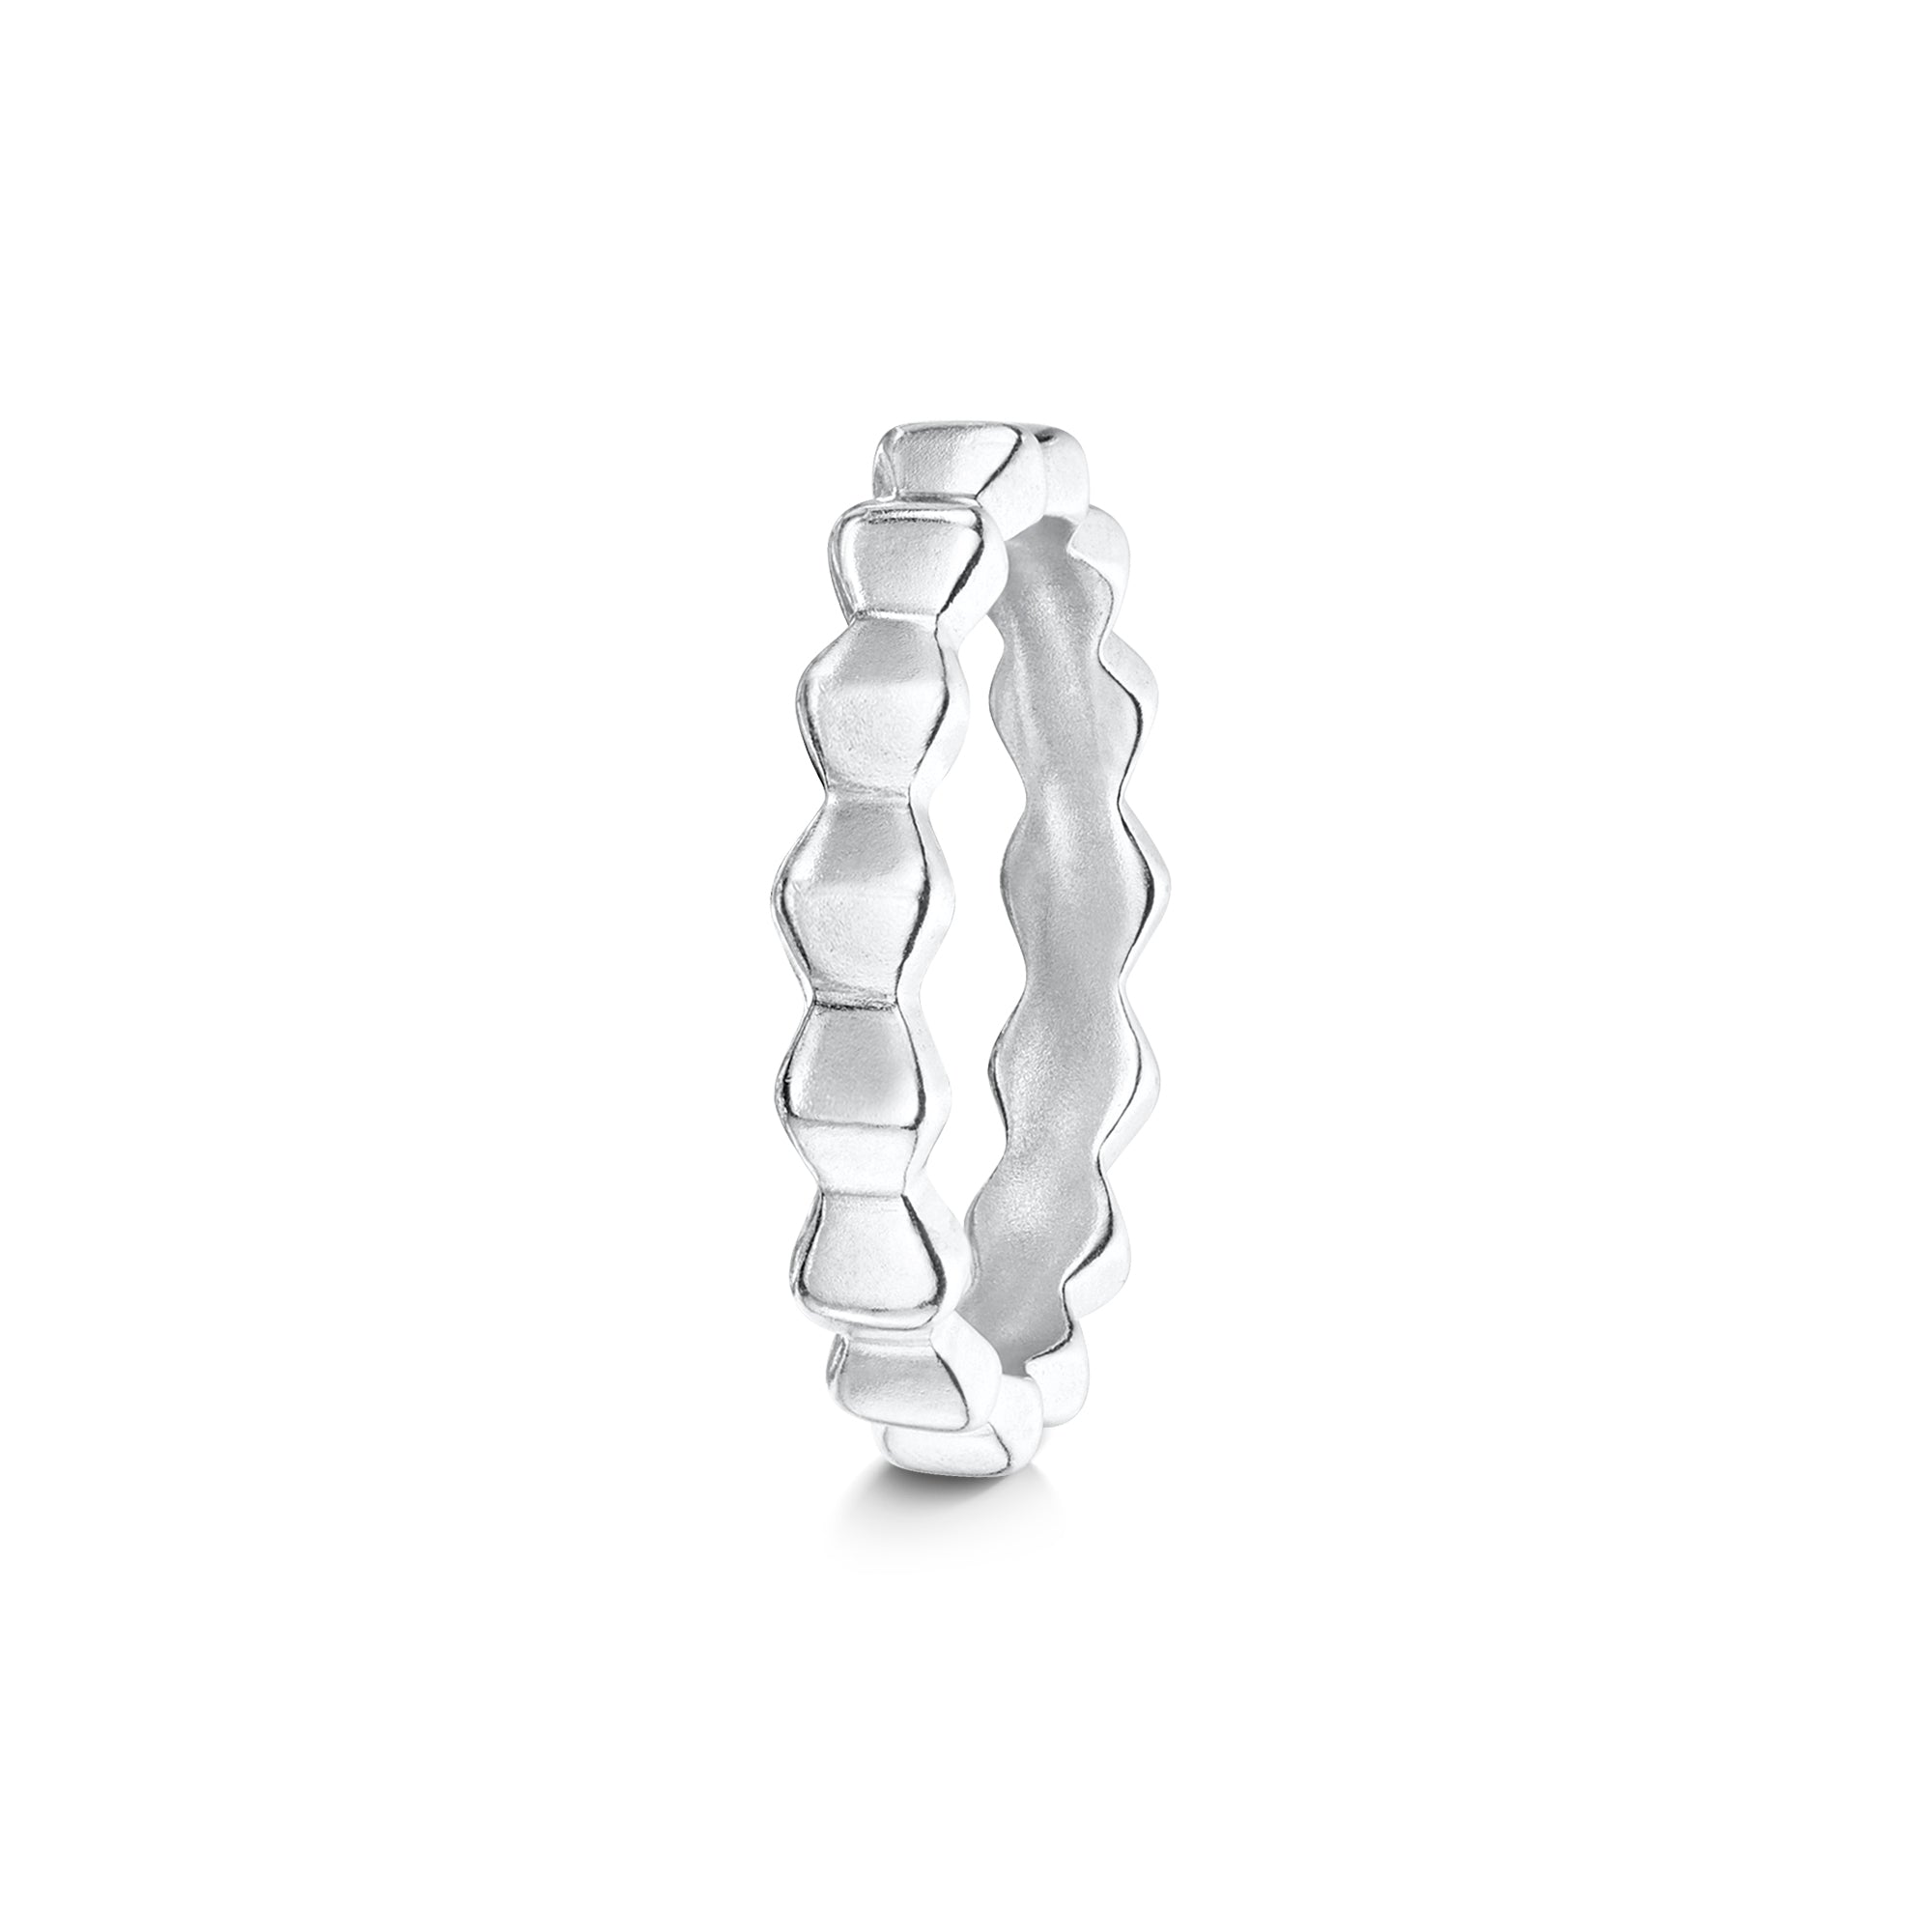 Pyra Stacking Ring in Sterling Silver